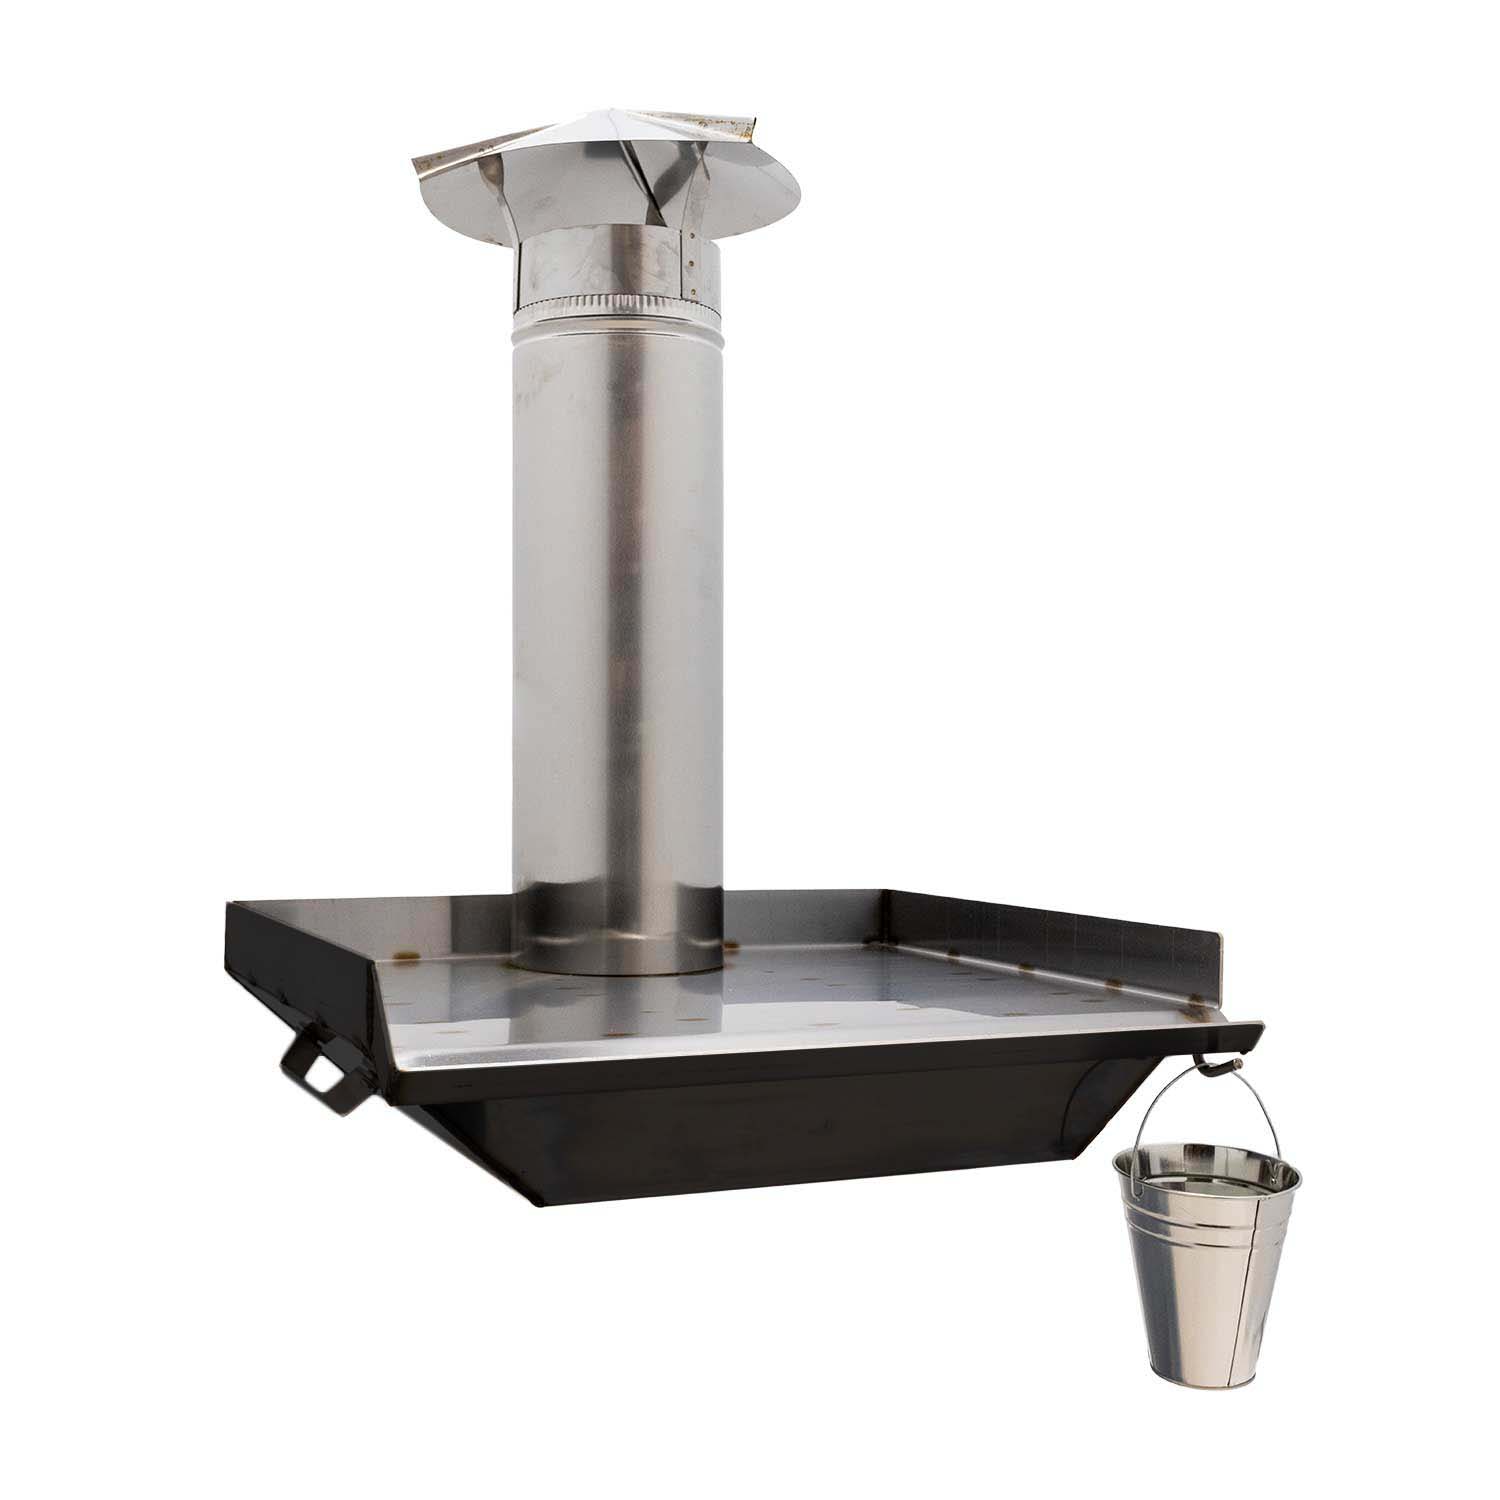 Timber Pellet Heaters Patio Griddle | Products Wood Timber |